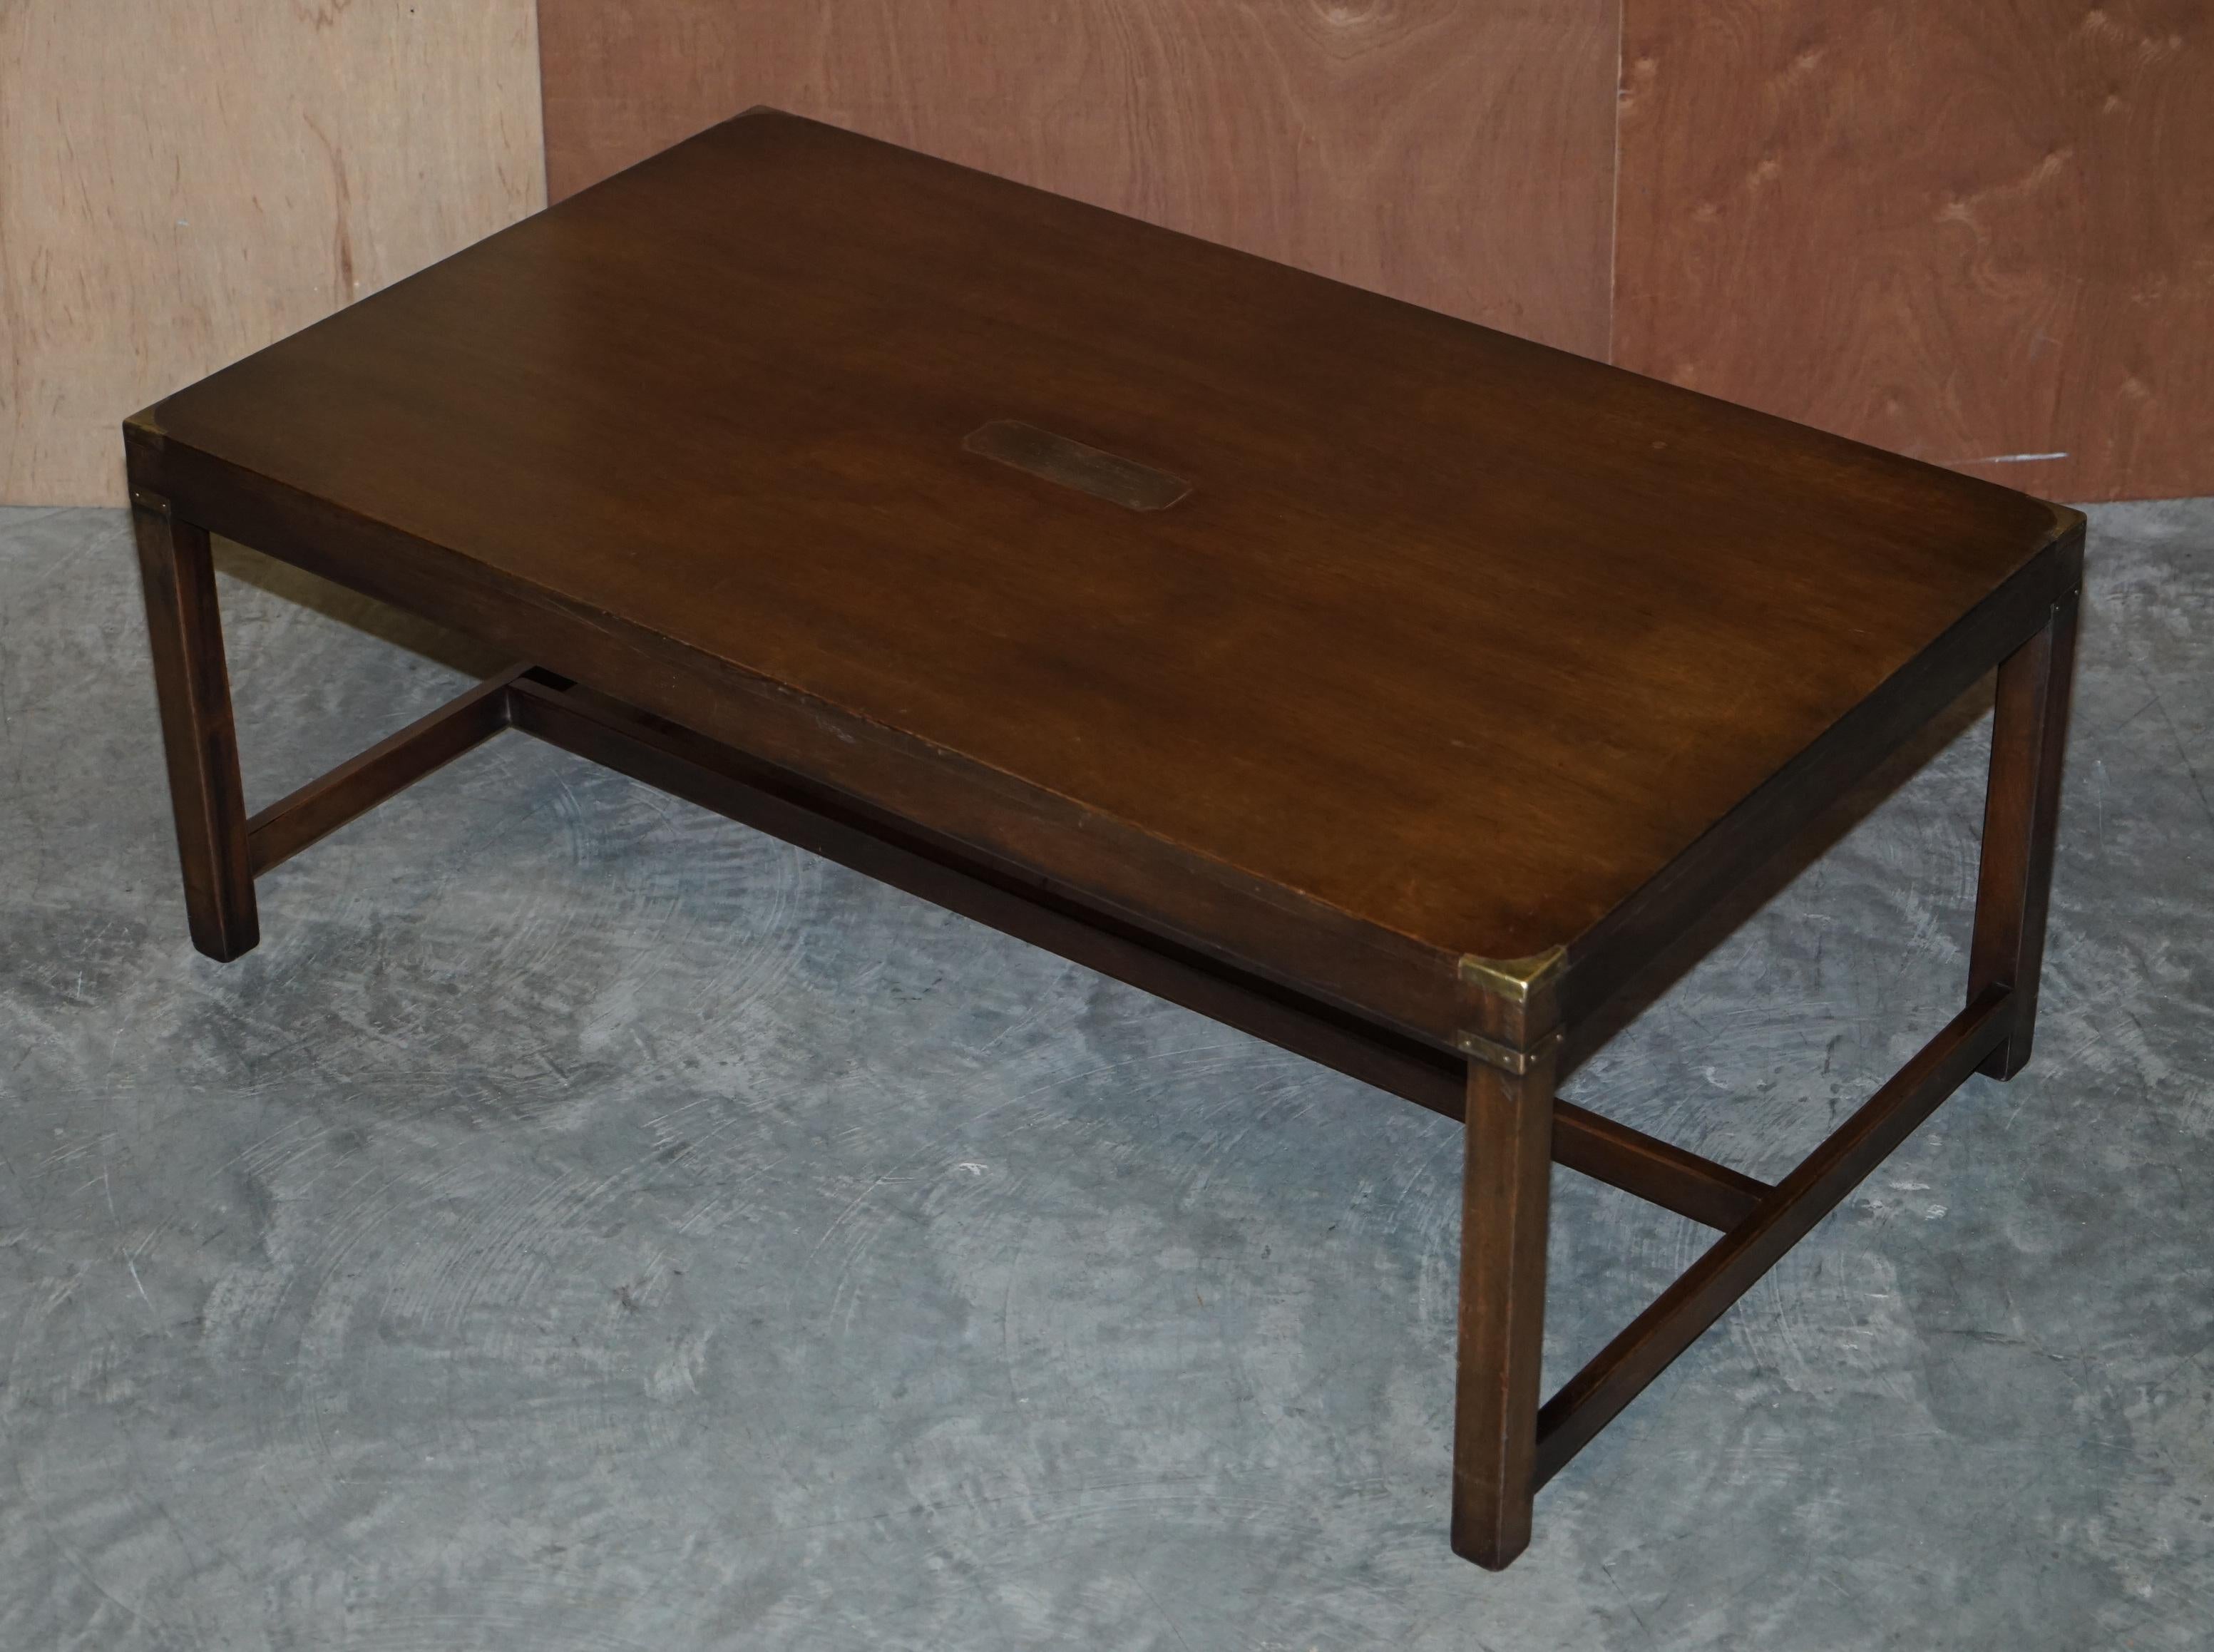 We are delighted to offer for sale this very large Harrods Kennedy mahogany and brass Military Campaign coffee table

A very good looking and well made military table, made by Harrods oldest concession, they retailed through Harrods for 87 years.